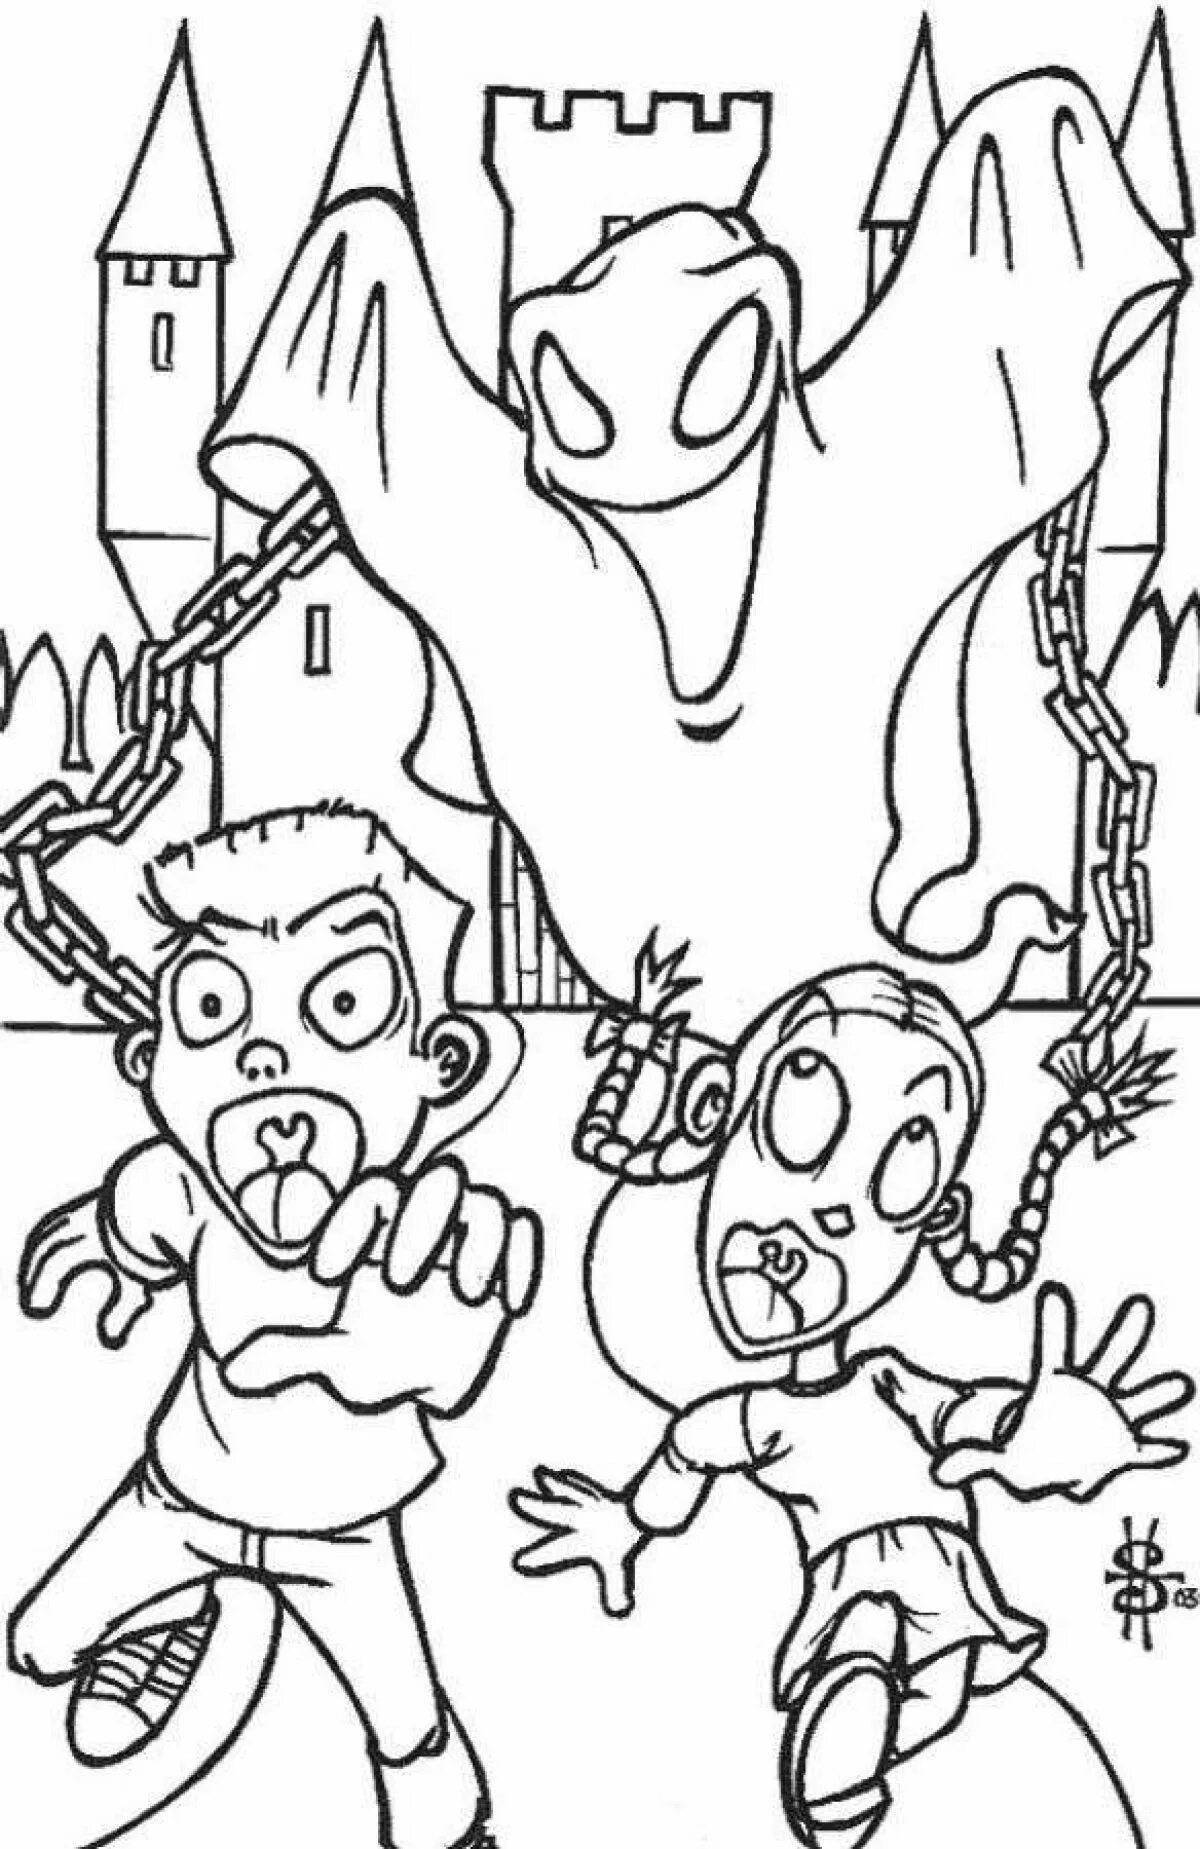 Coloring book creepy scary child